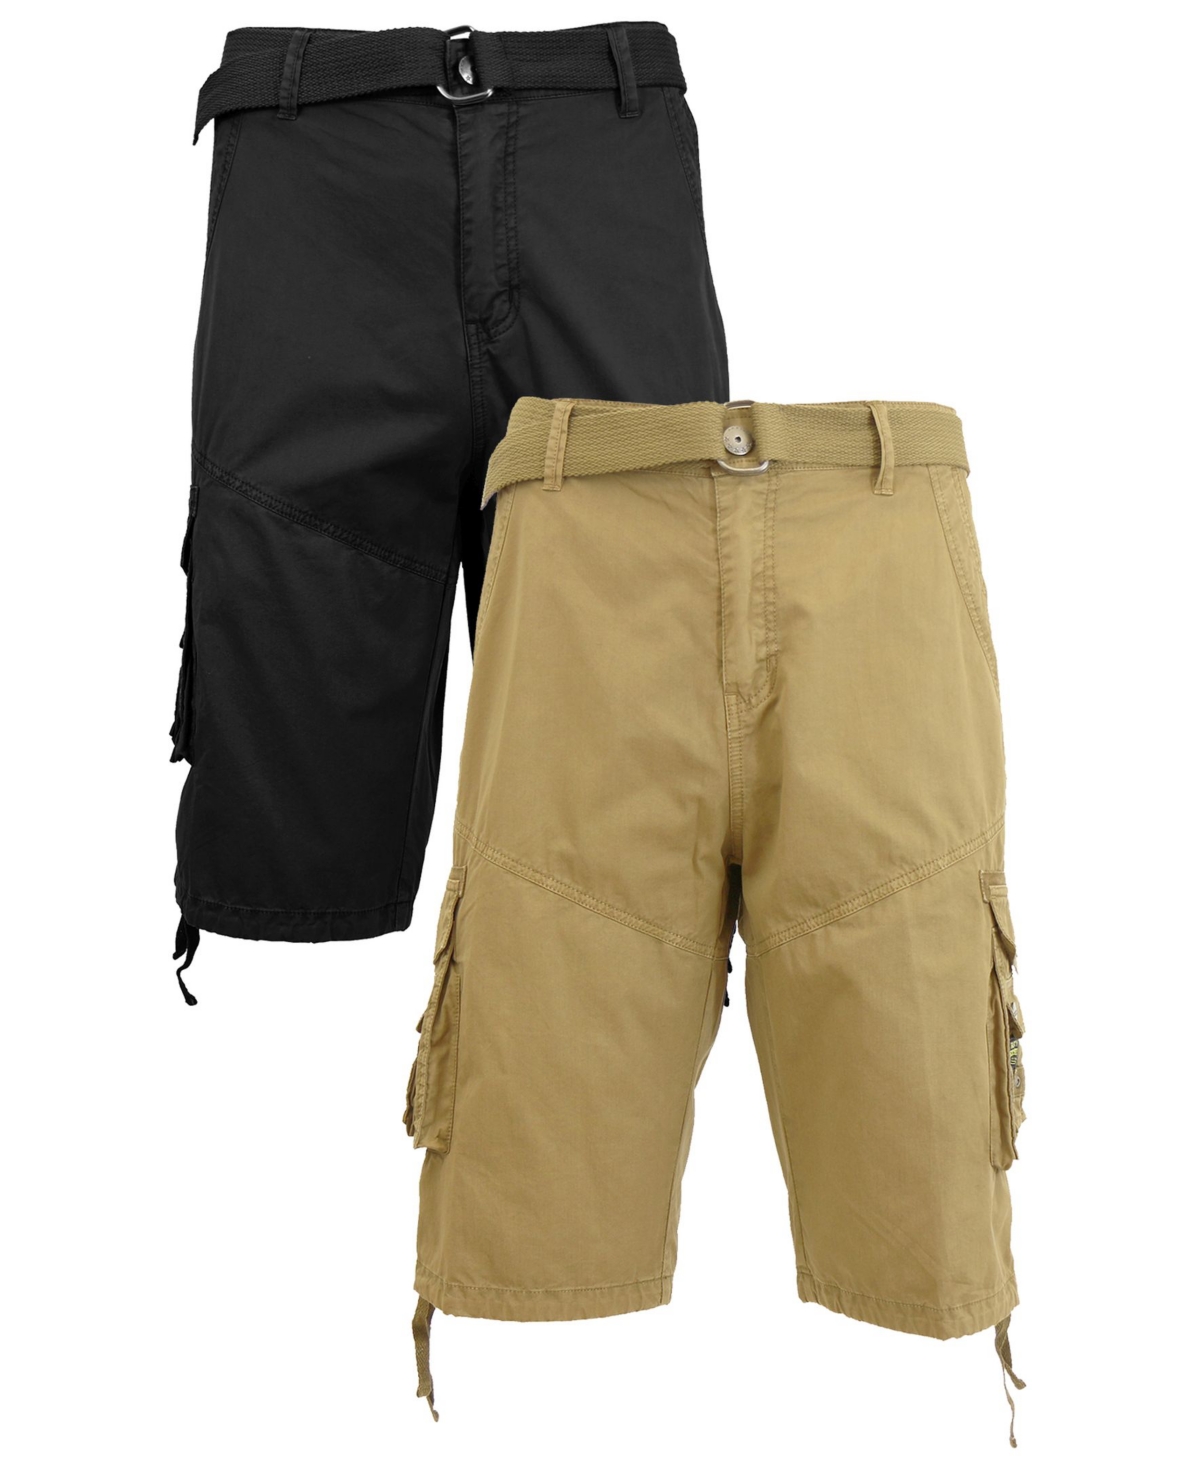 Galaxy By Harvic Men's Belted Cargo Shorts With Twill Flat Front Washed Utility Pockets, Pack Of 2 In Black And Khaki